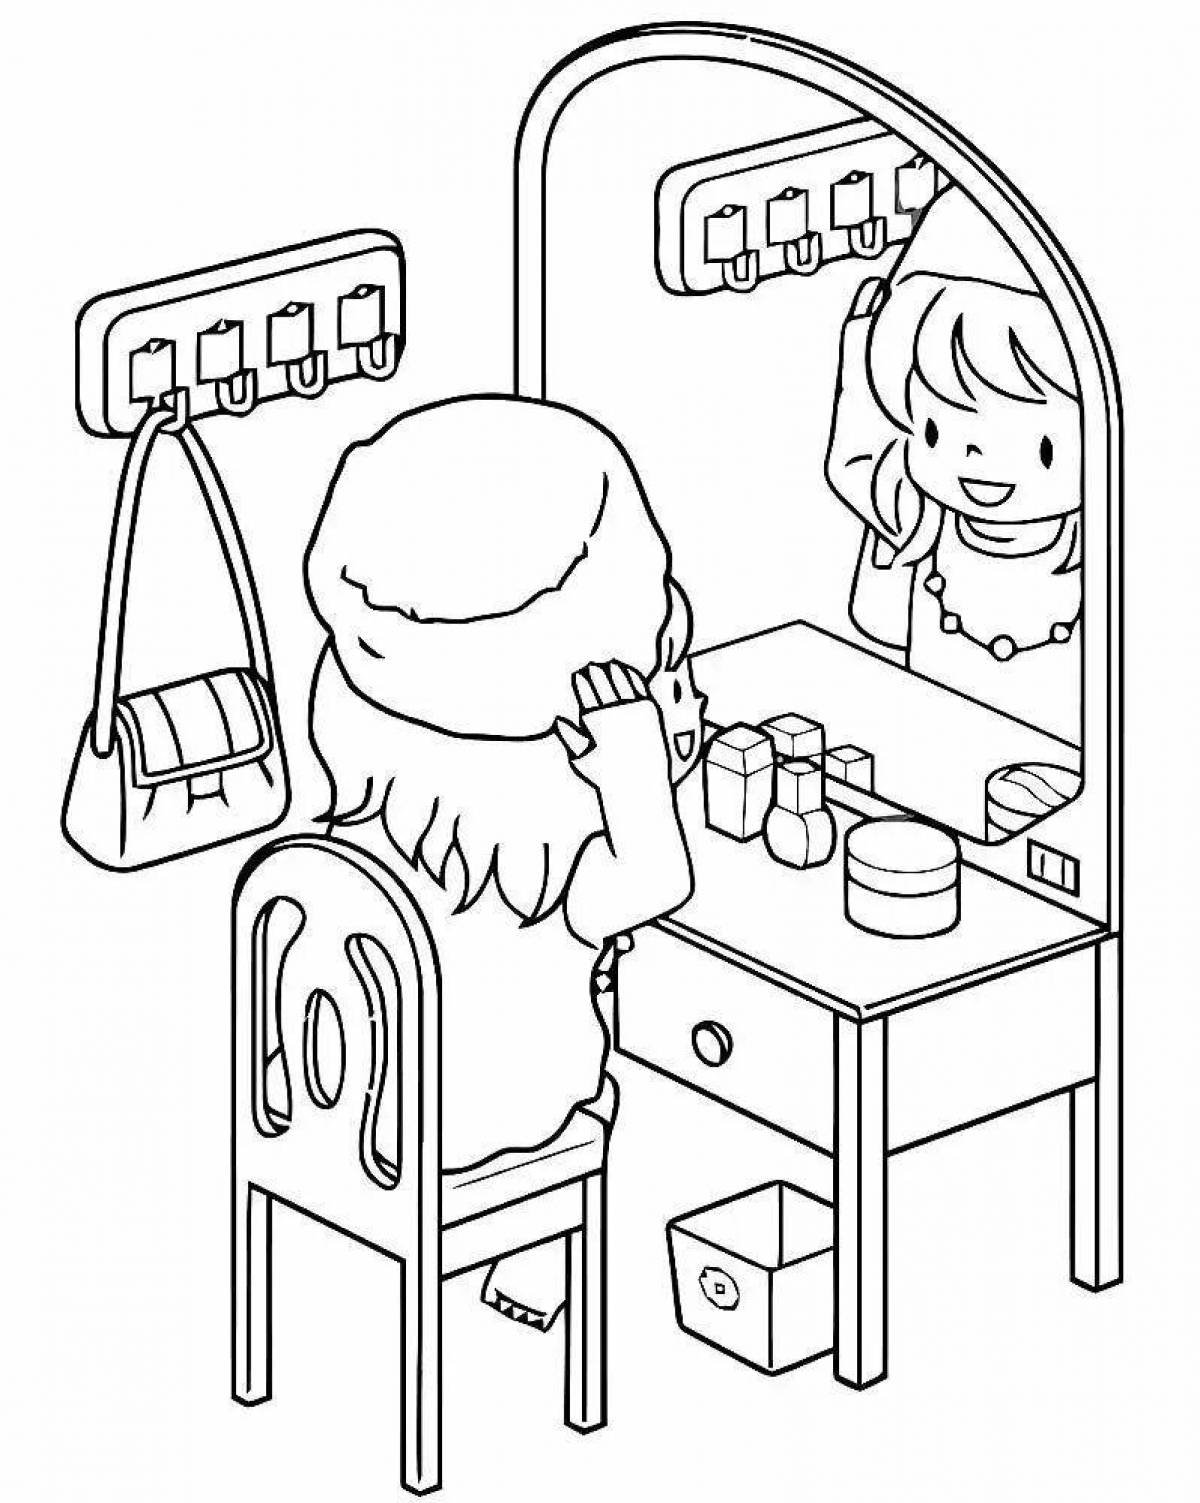 Toka side furniture coloring page